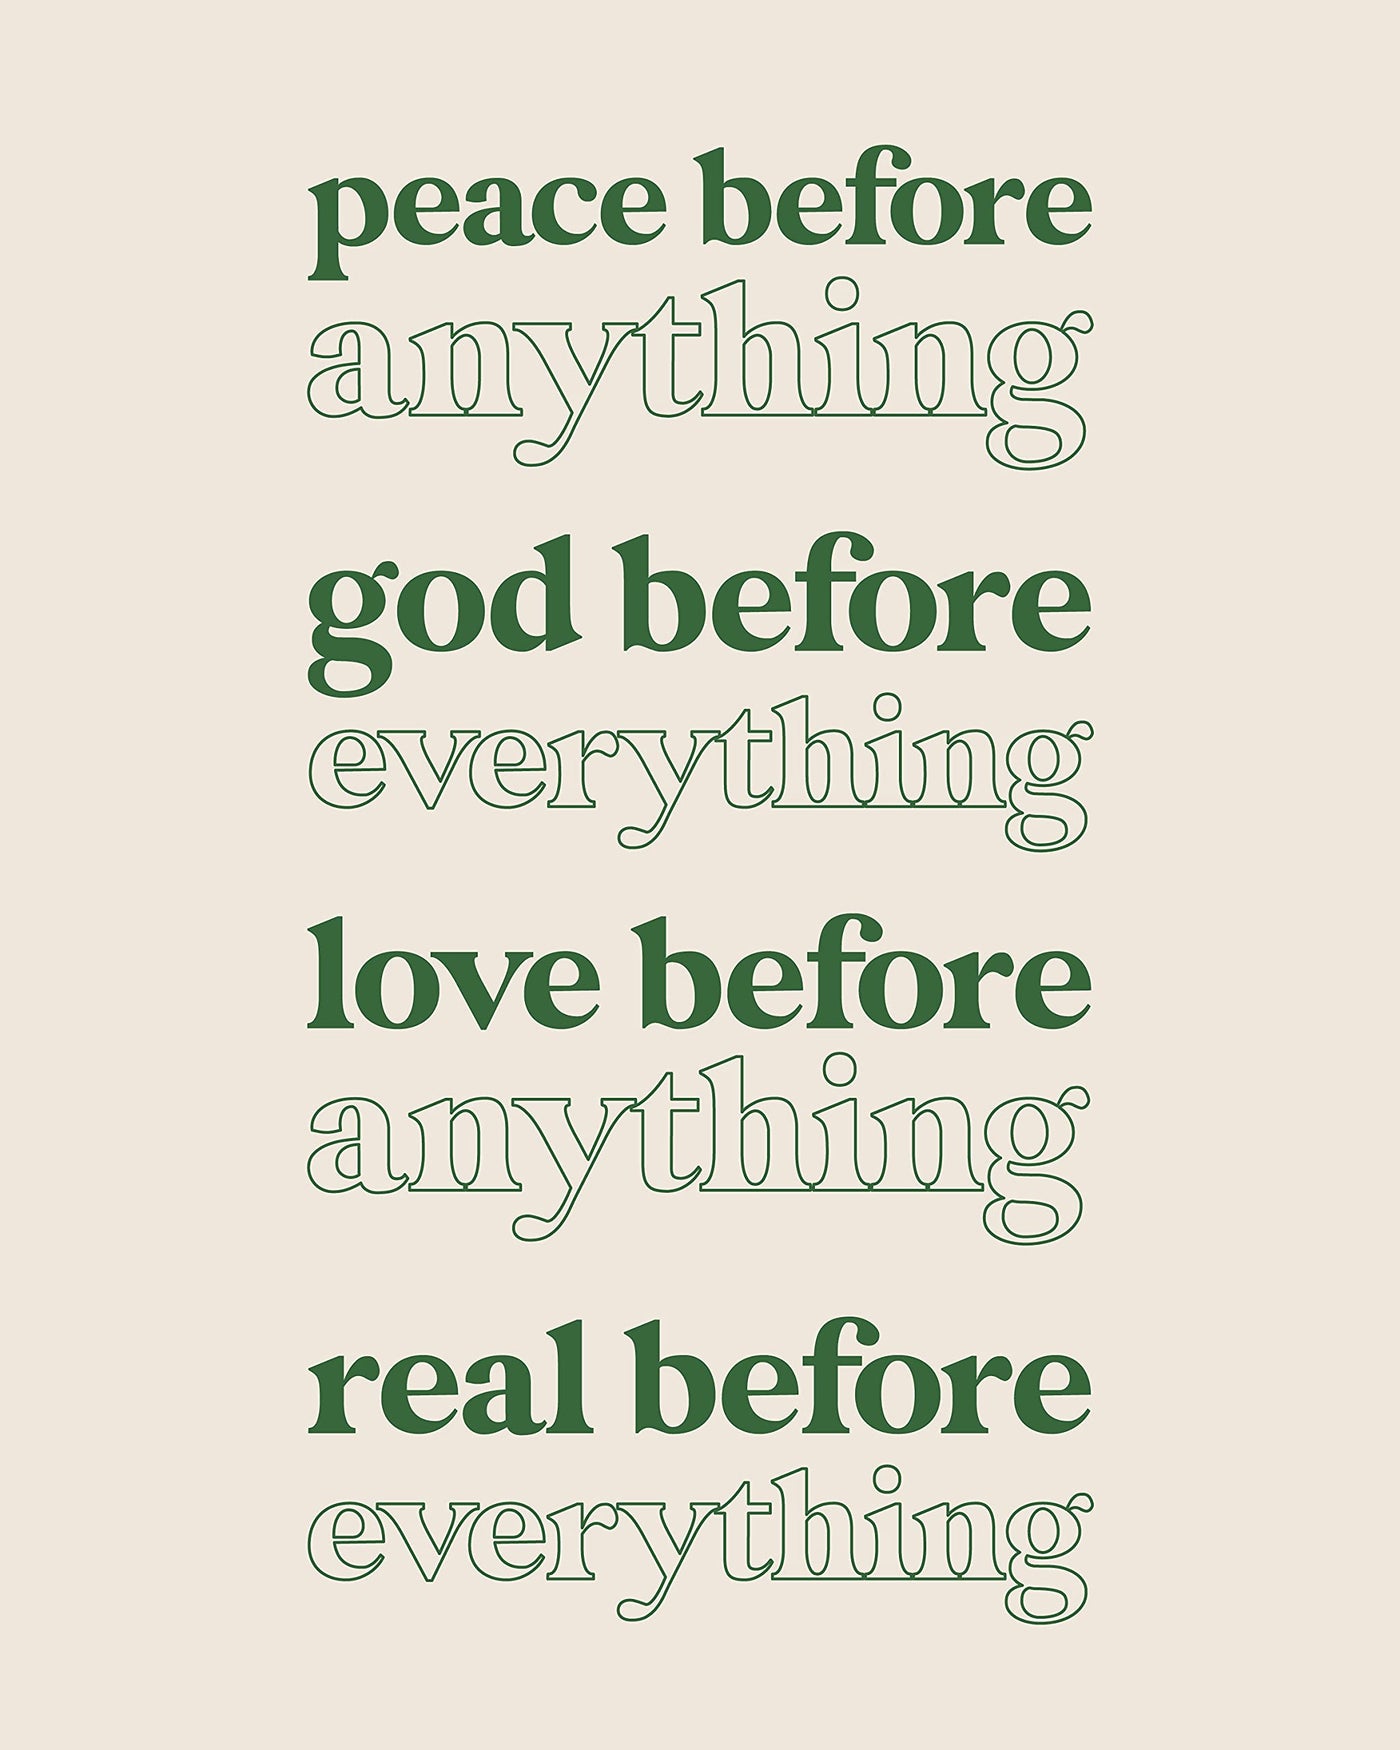 Peace Before Anything-God Before Everything Inspirational Quotes Wall Art-8x10" Retro Christian Print-Ready to Frame. Typographic Design. Positive Decor for Home-Office-Church. Great Gift of Faith!